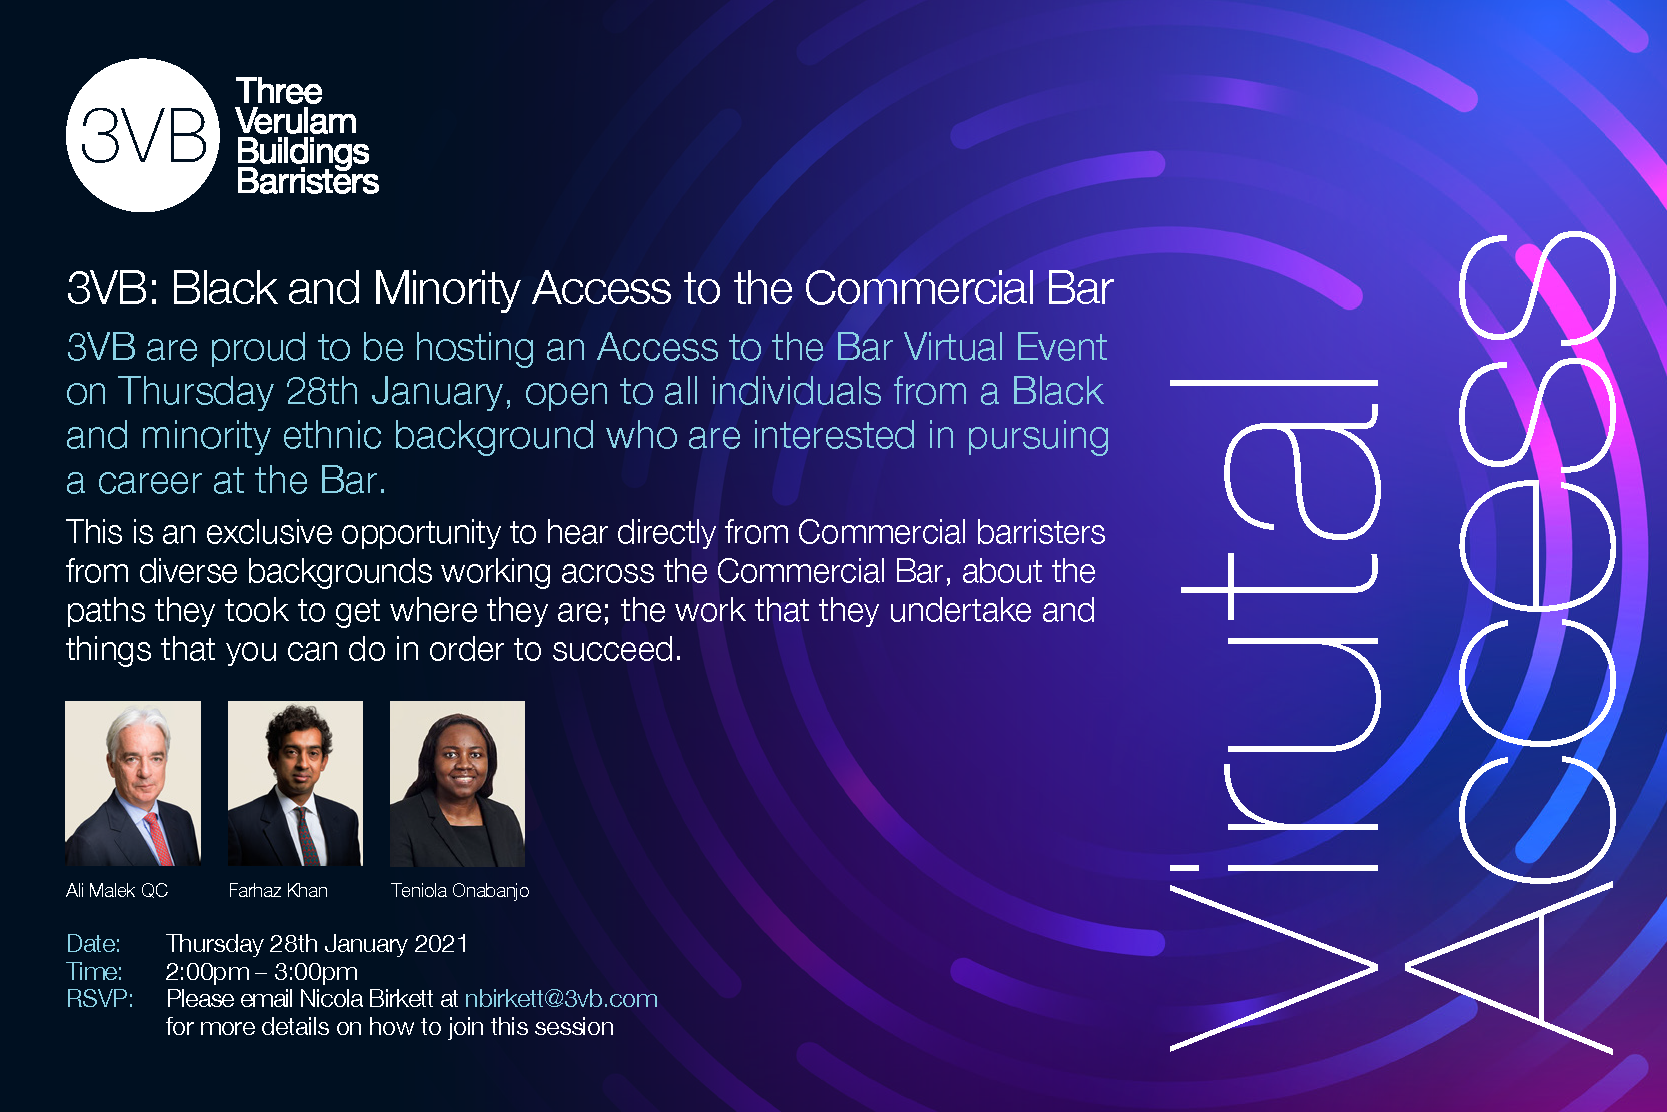 3VB Black and Minority Access to the Bar event poster